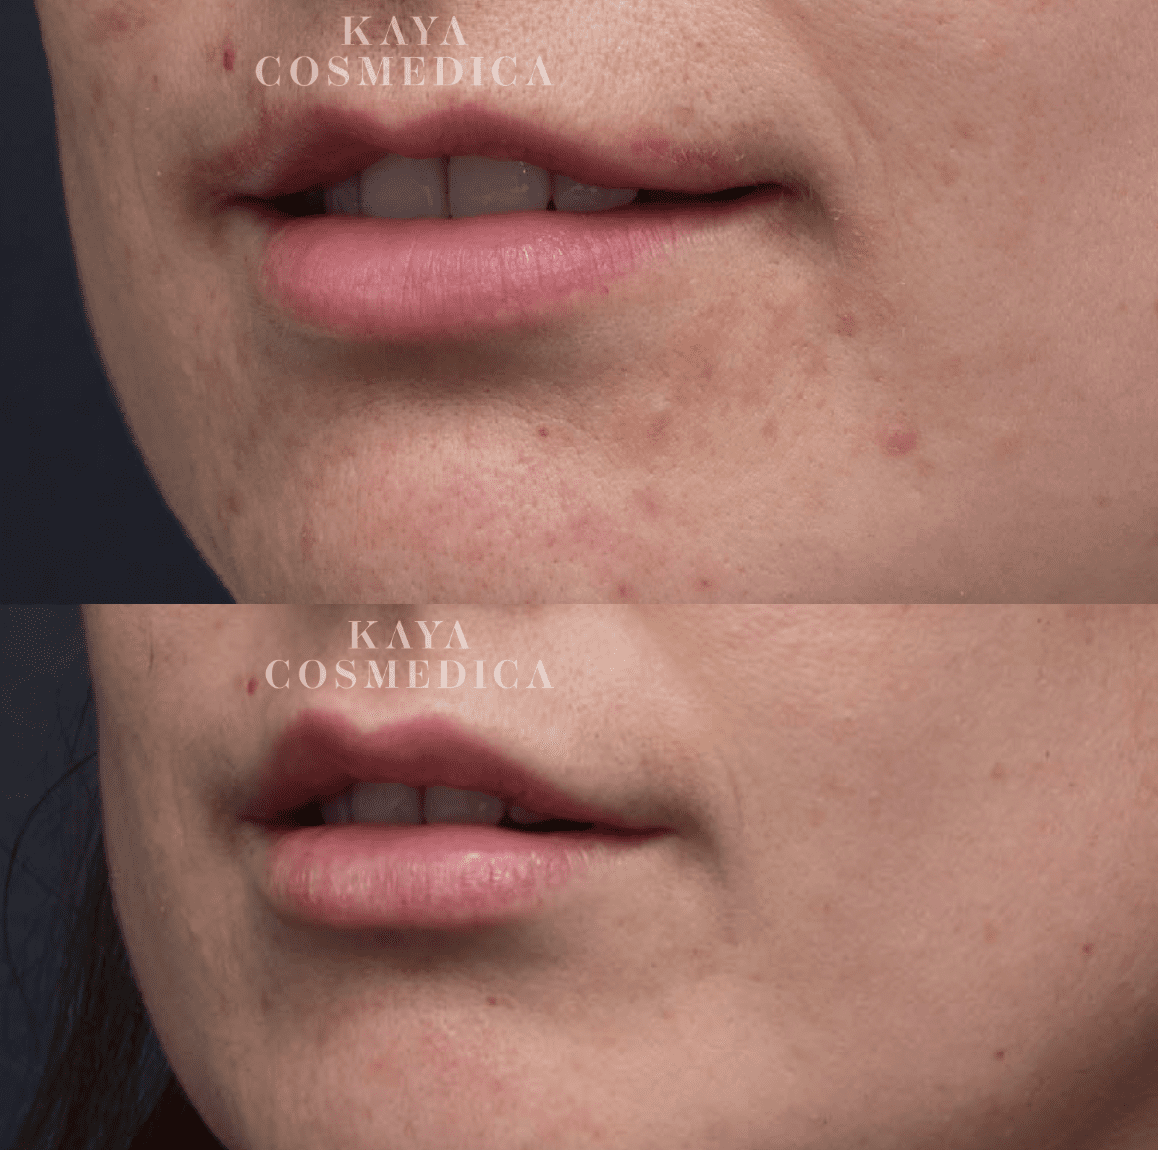 Close-up comparison of a woman's lower face, before and after cosmetic treatment, showing improved skin texture and reduced imperfections around the mouth and chin area, including lip enhancement.